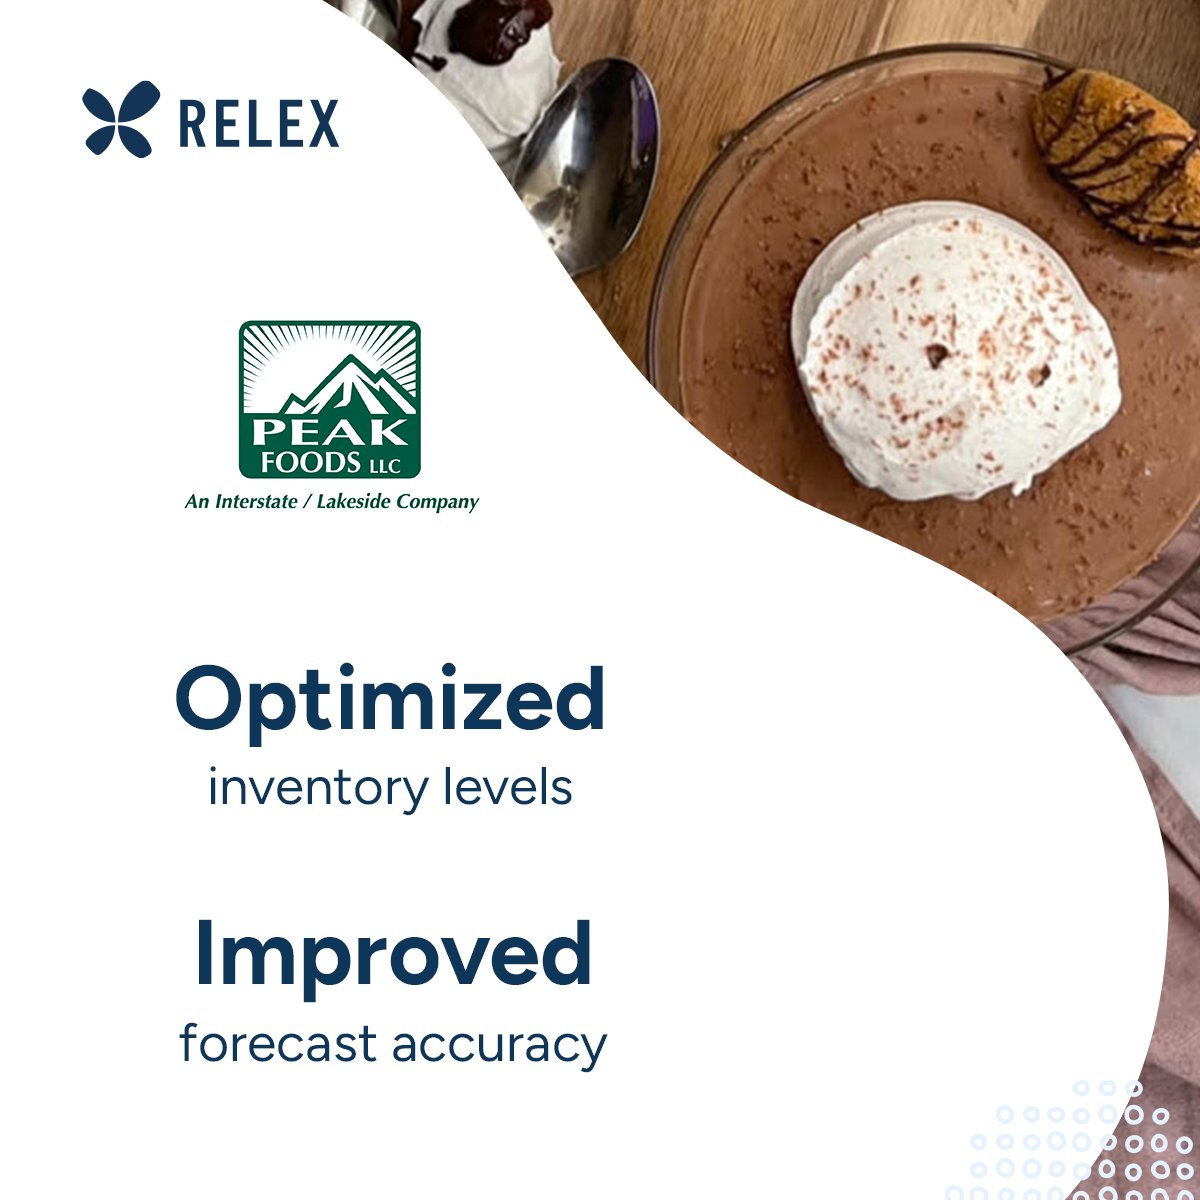 Peak Foods enhances planning and operations with RELEX! Transitioning to make-to-stock, they're integrating forecasting and inventory planning to handle seasonal demand. No more spreadsheets! #SupplyChain #inventory relexsolutions.com/resources/peak…